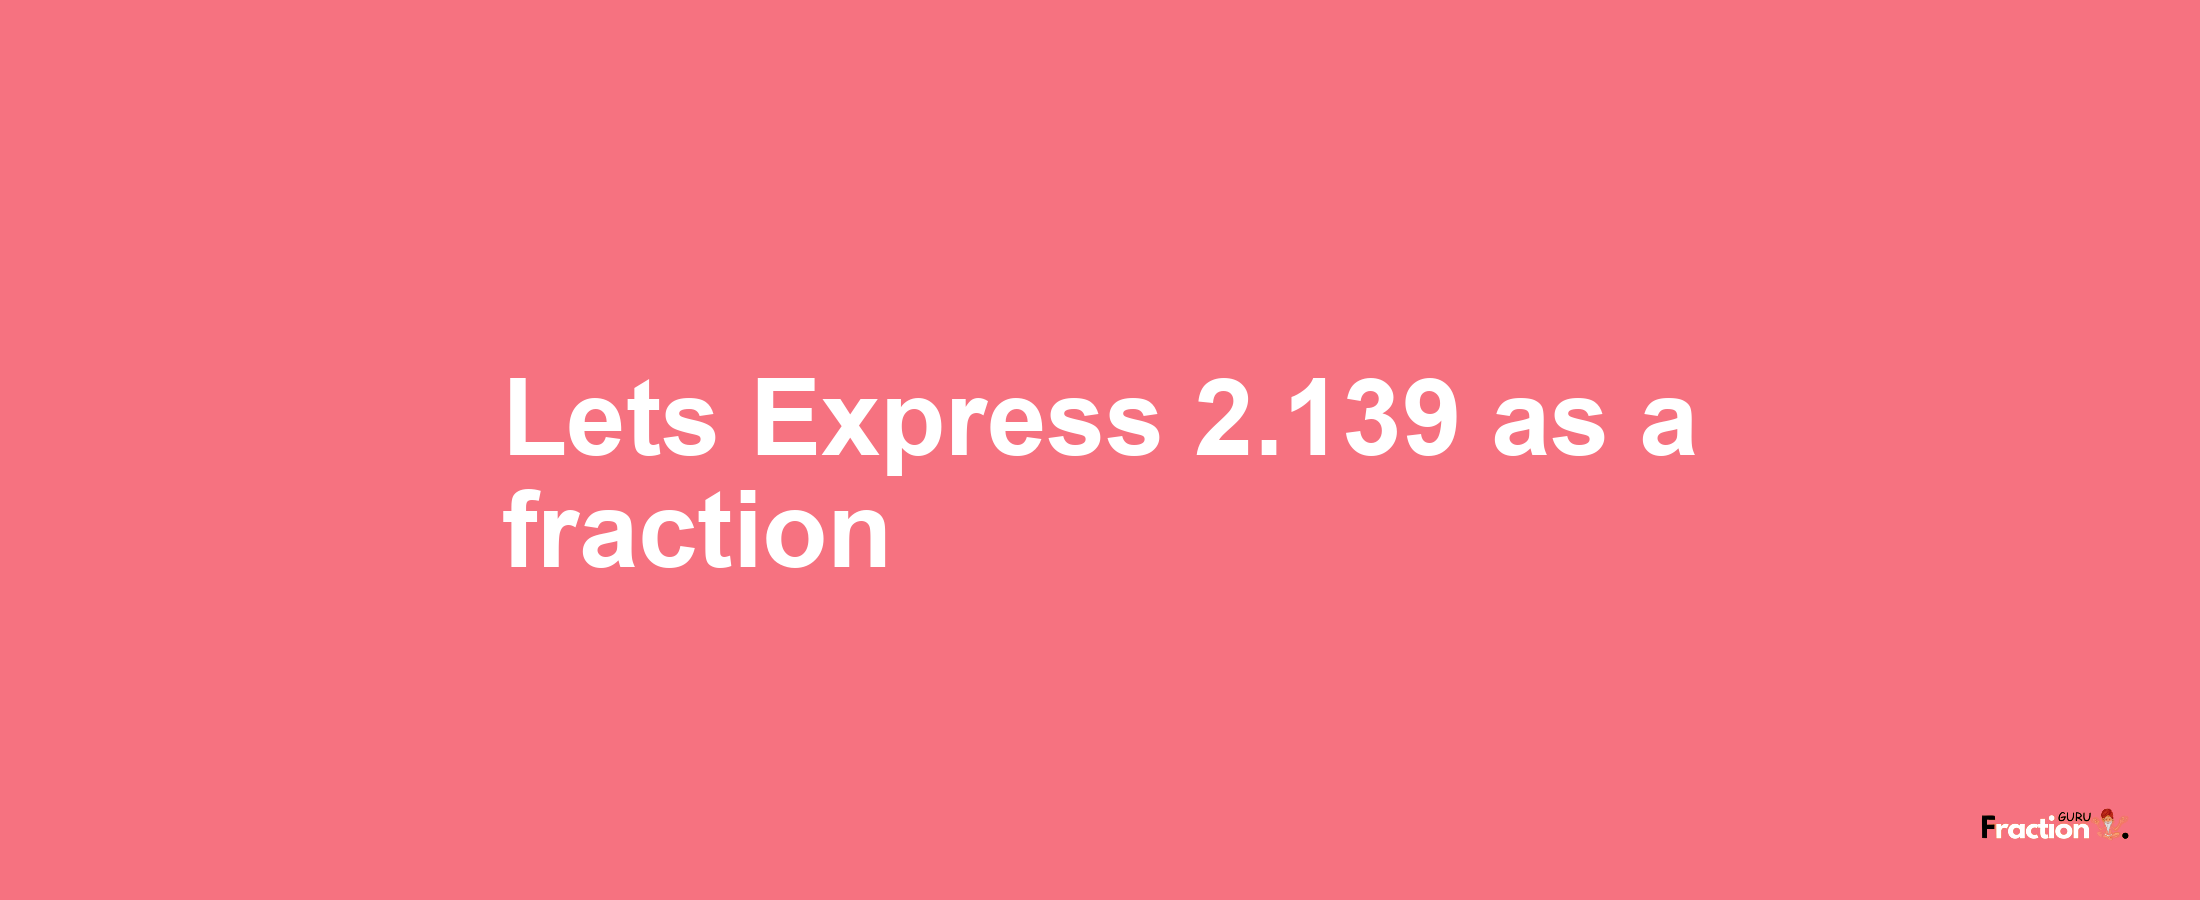 Lets Express 2.139 as afraction